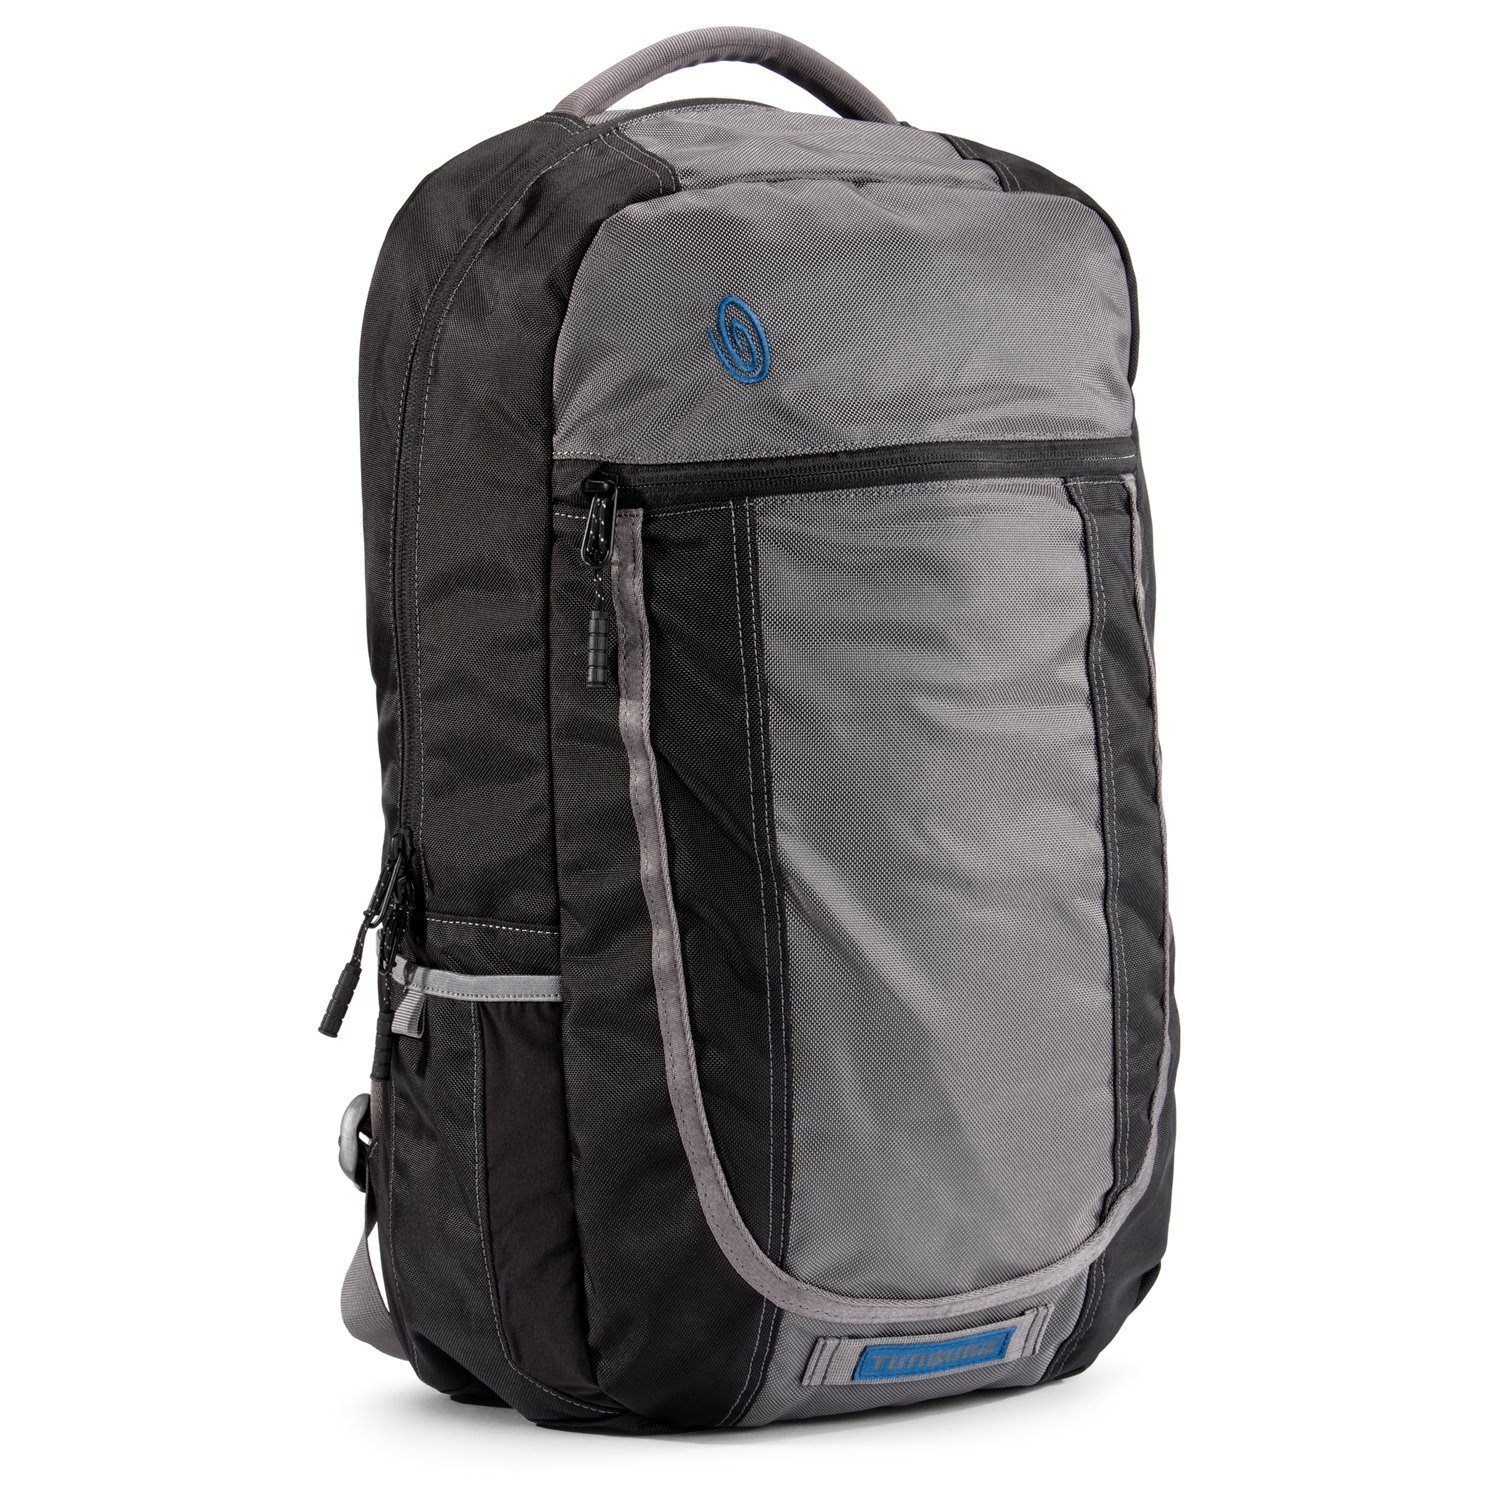 Timbuk2 Proof Backpack only for $46.12(54%off)+free shipping